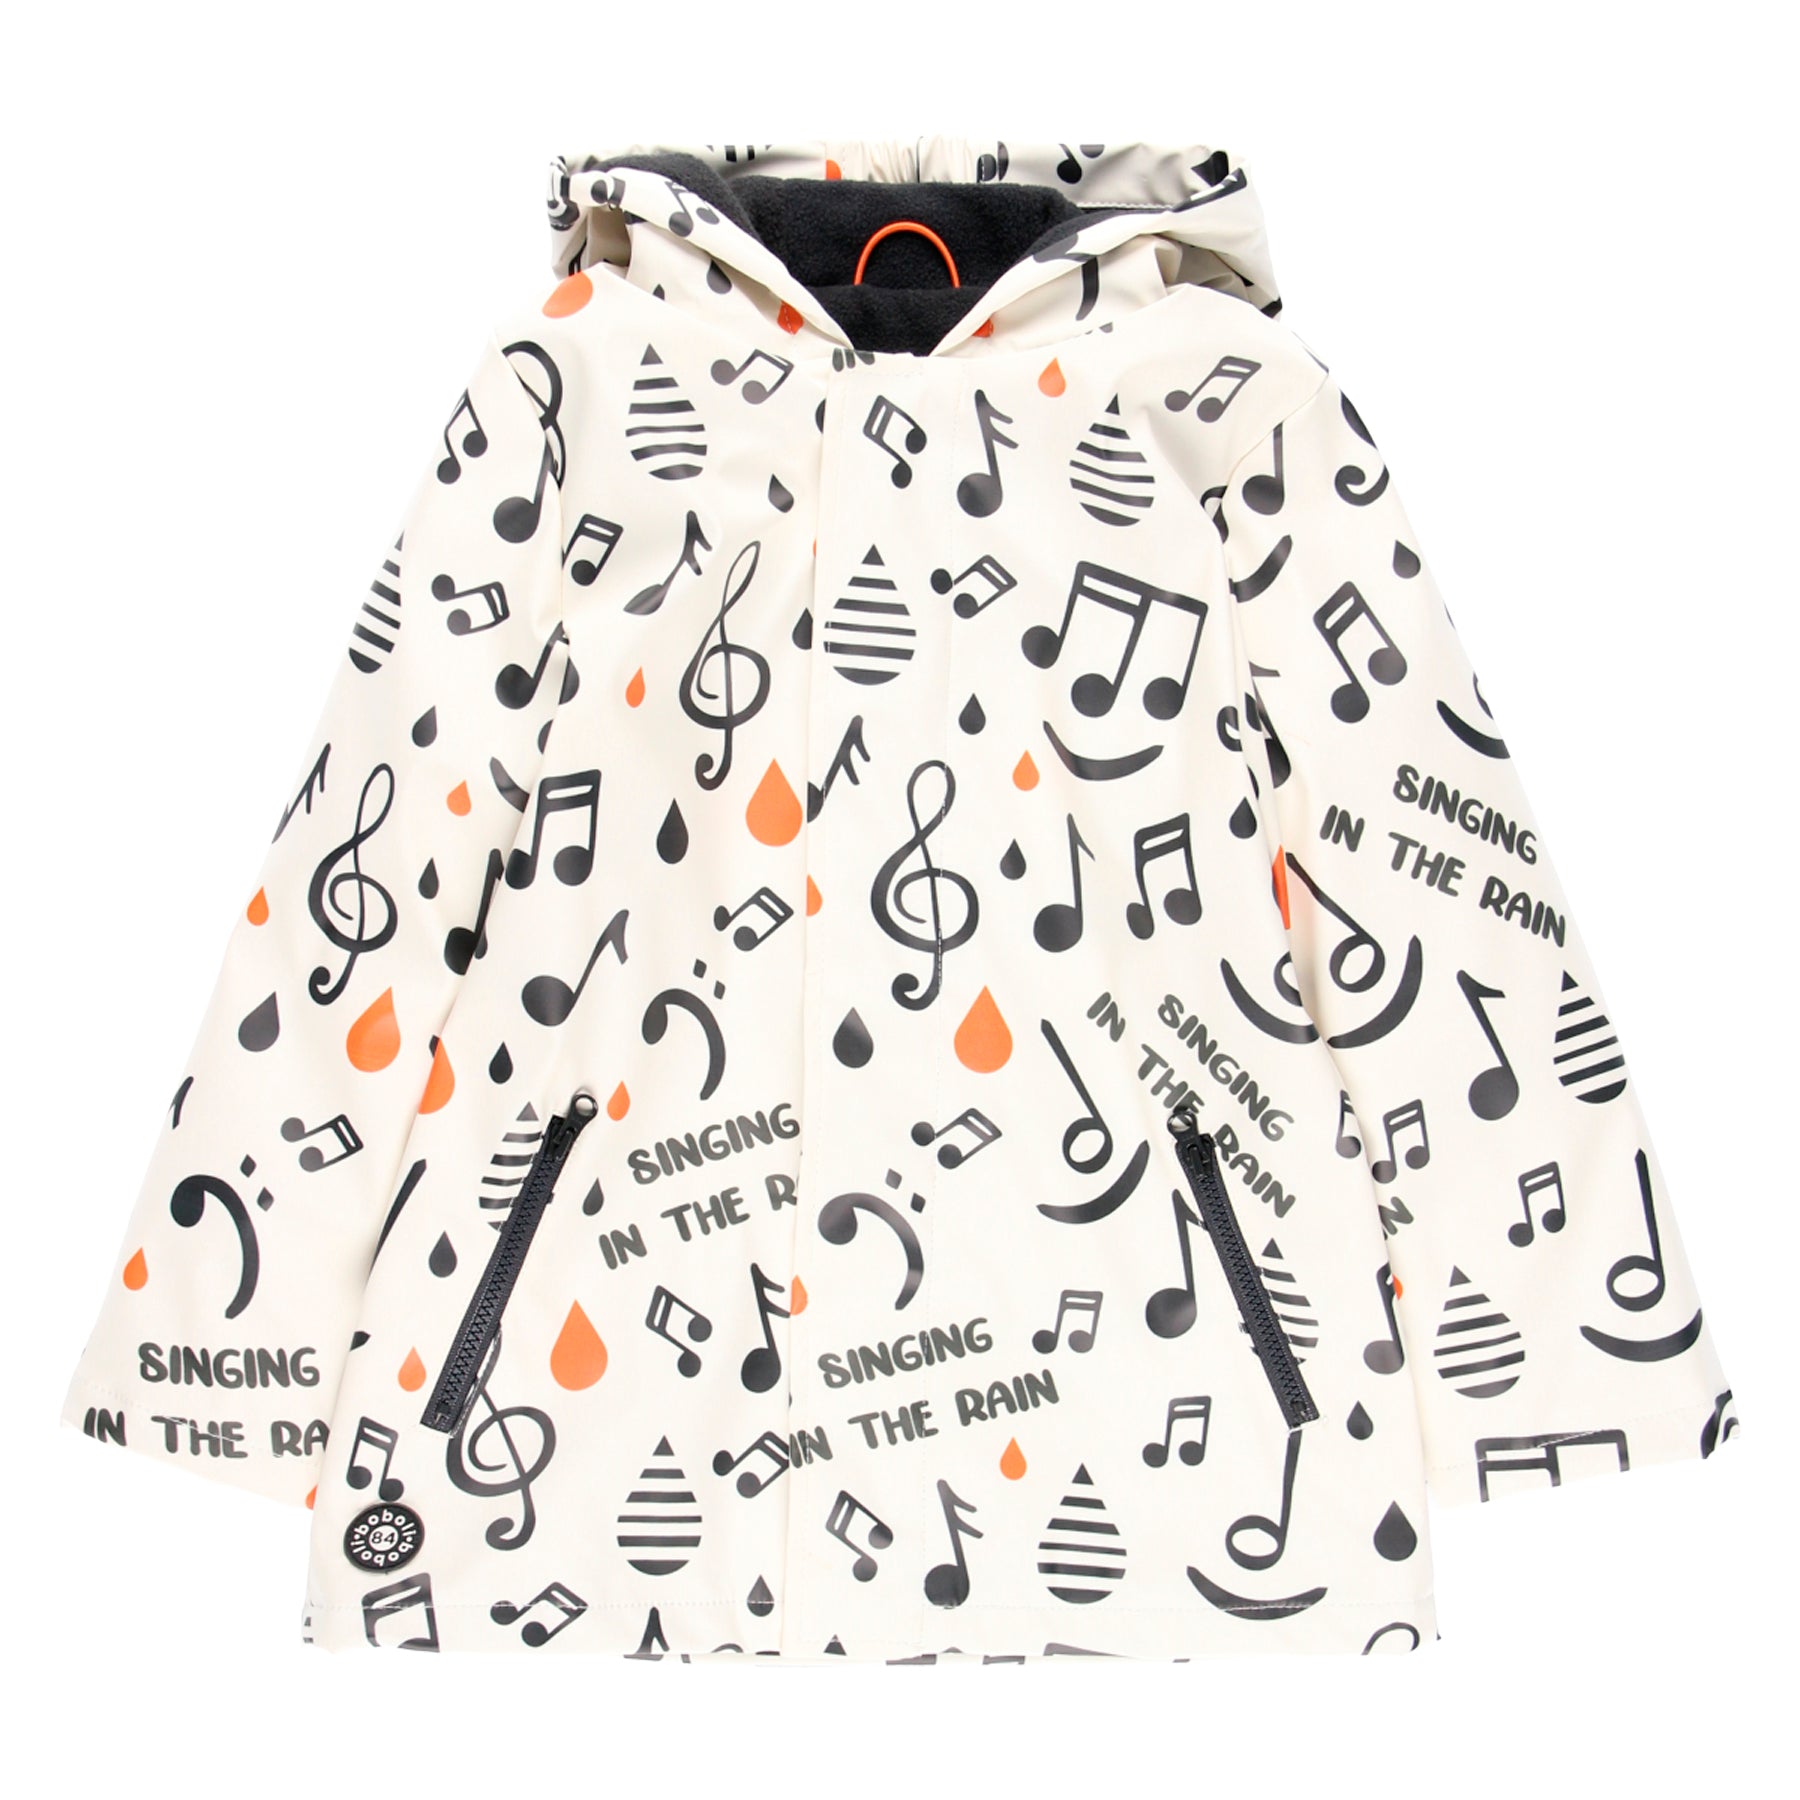 Impermeable Notas Musicales Boboli